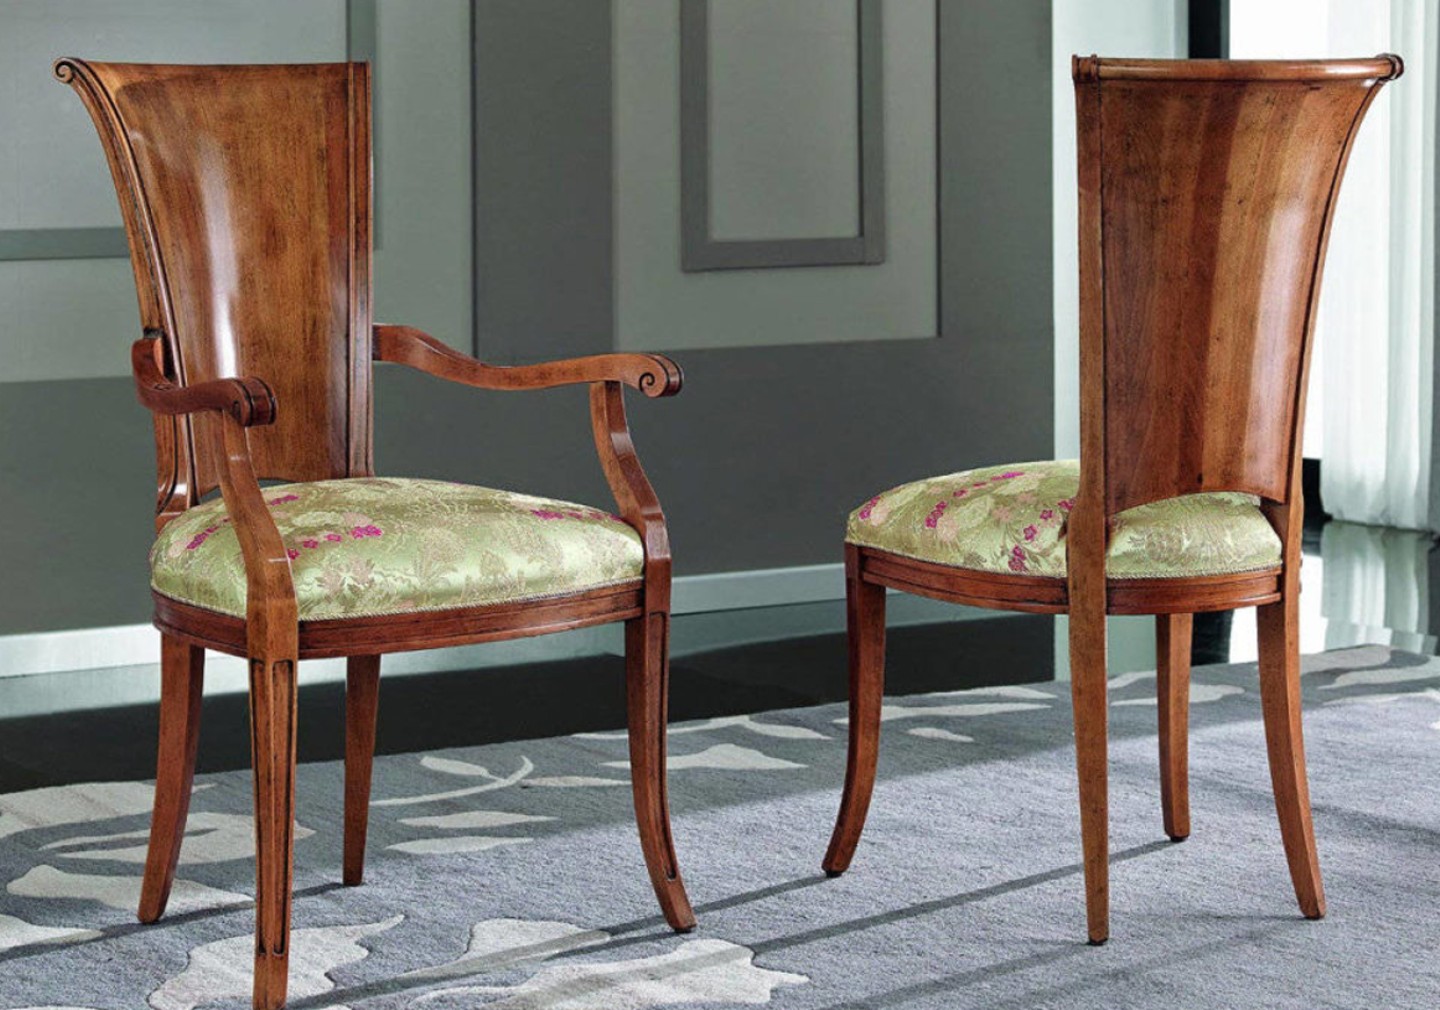 THE OLBIO CLASSIC DINING CHAIR